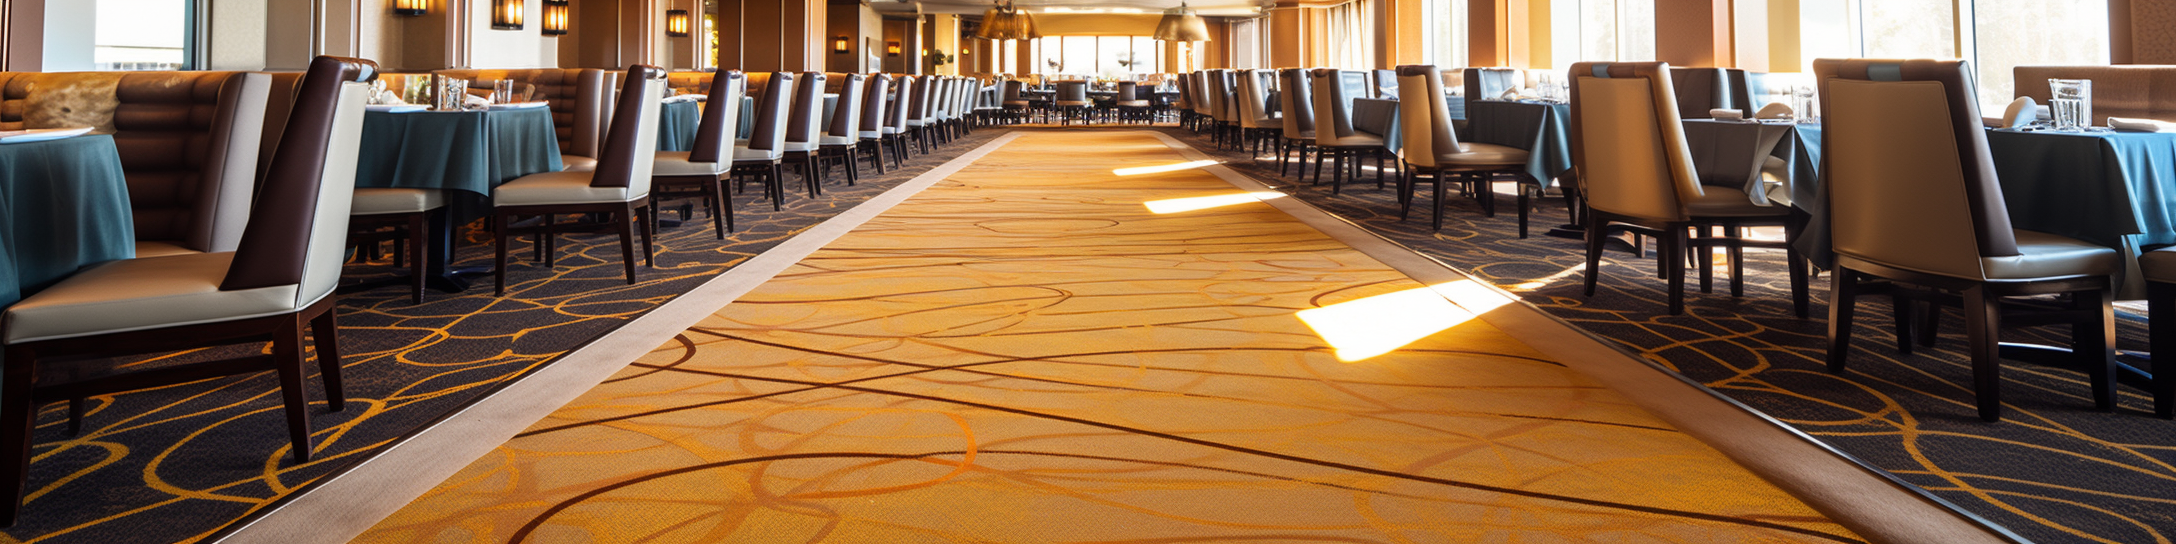 Professional Carpet Cleaning Services for Restaurants and Cafes